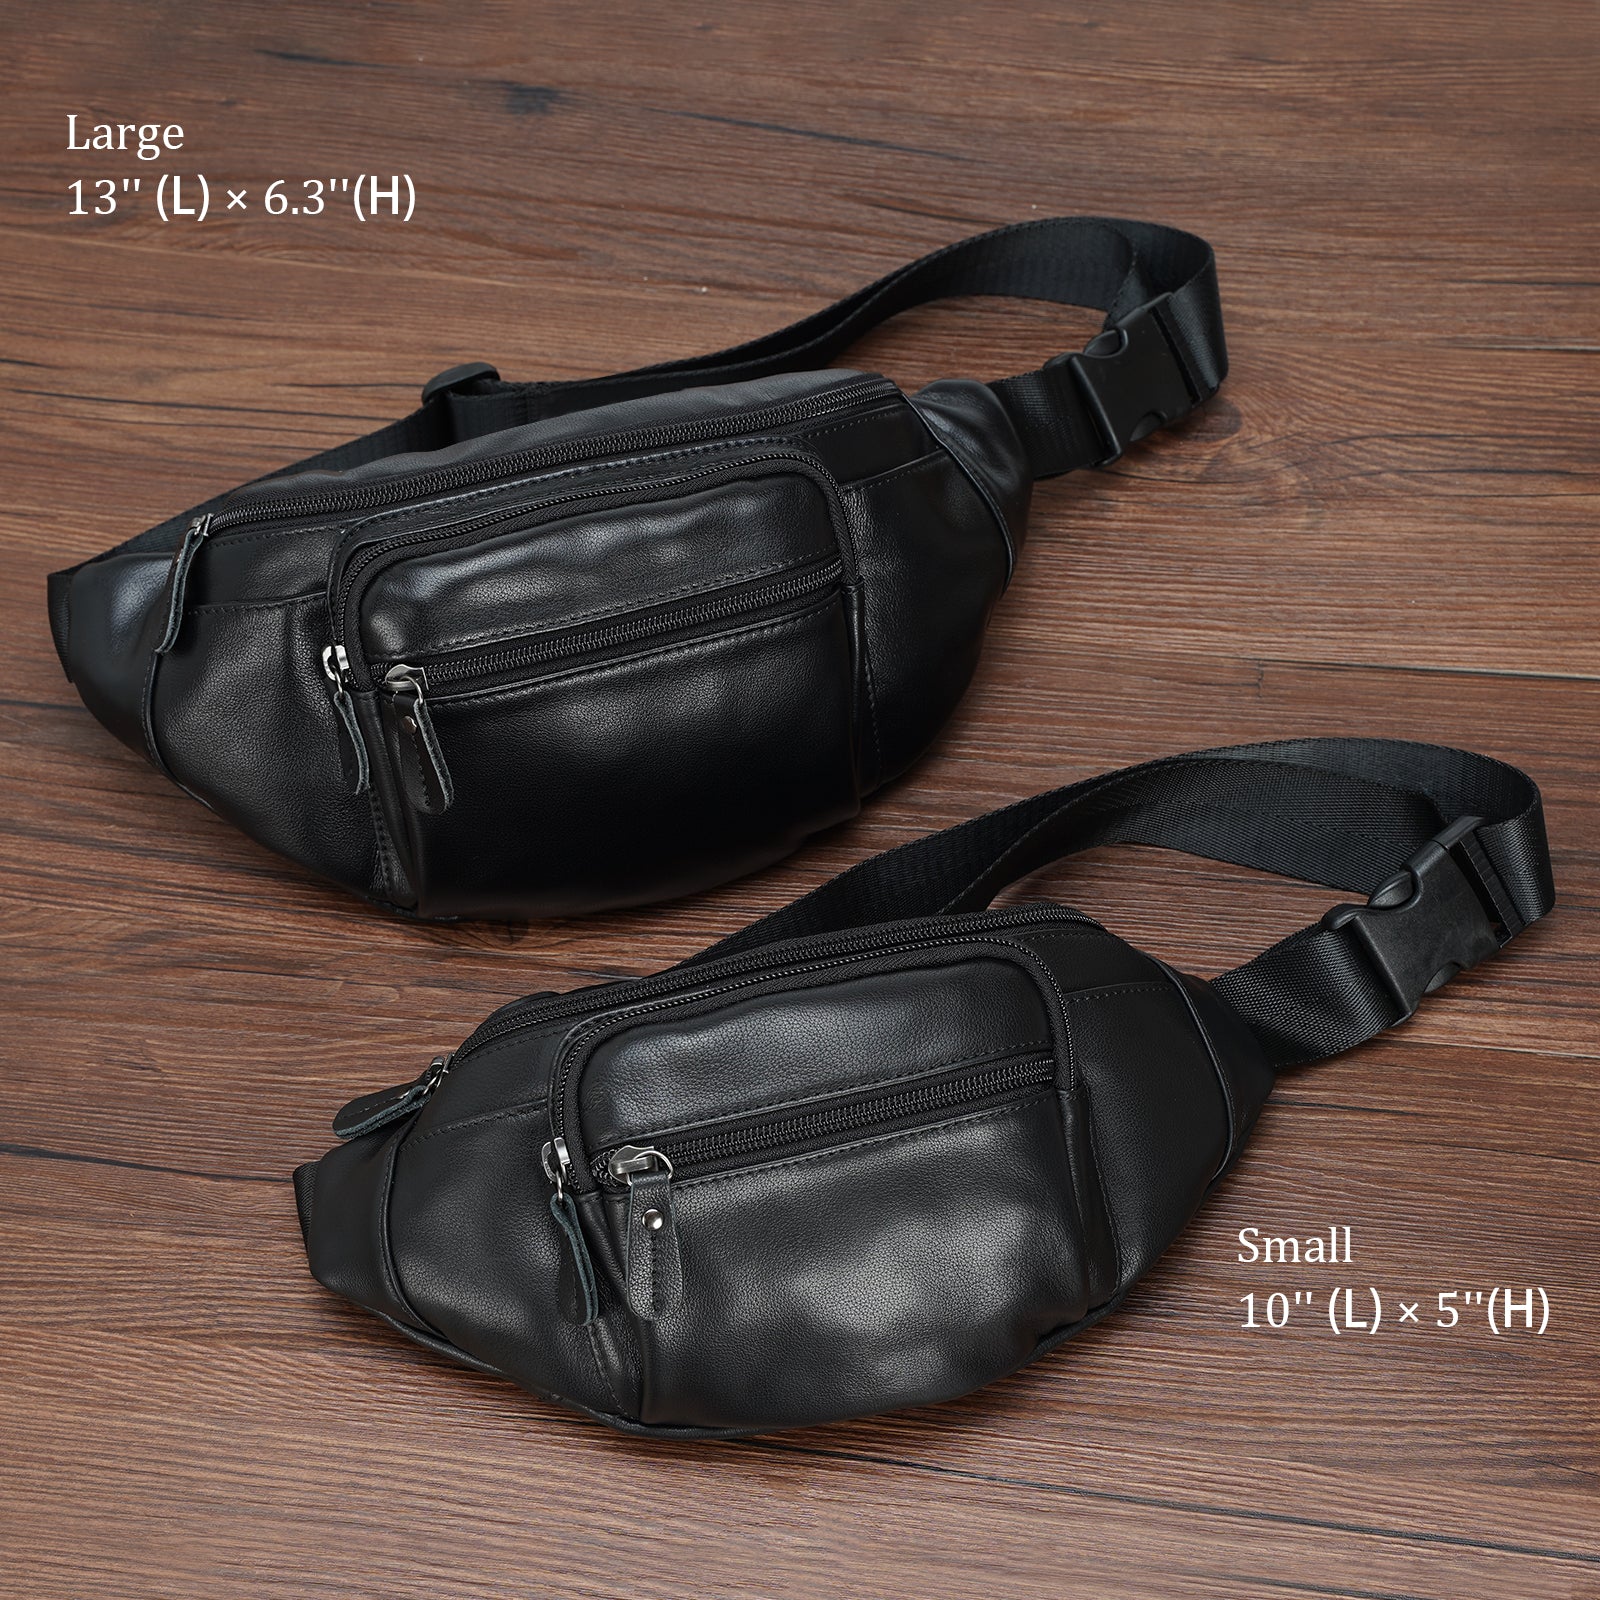 Leather Bum Bag With Replacement Bag Straps. A Stylish and 